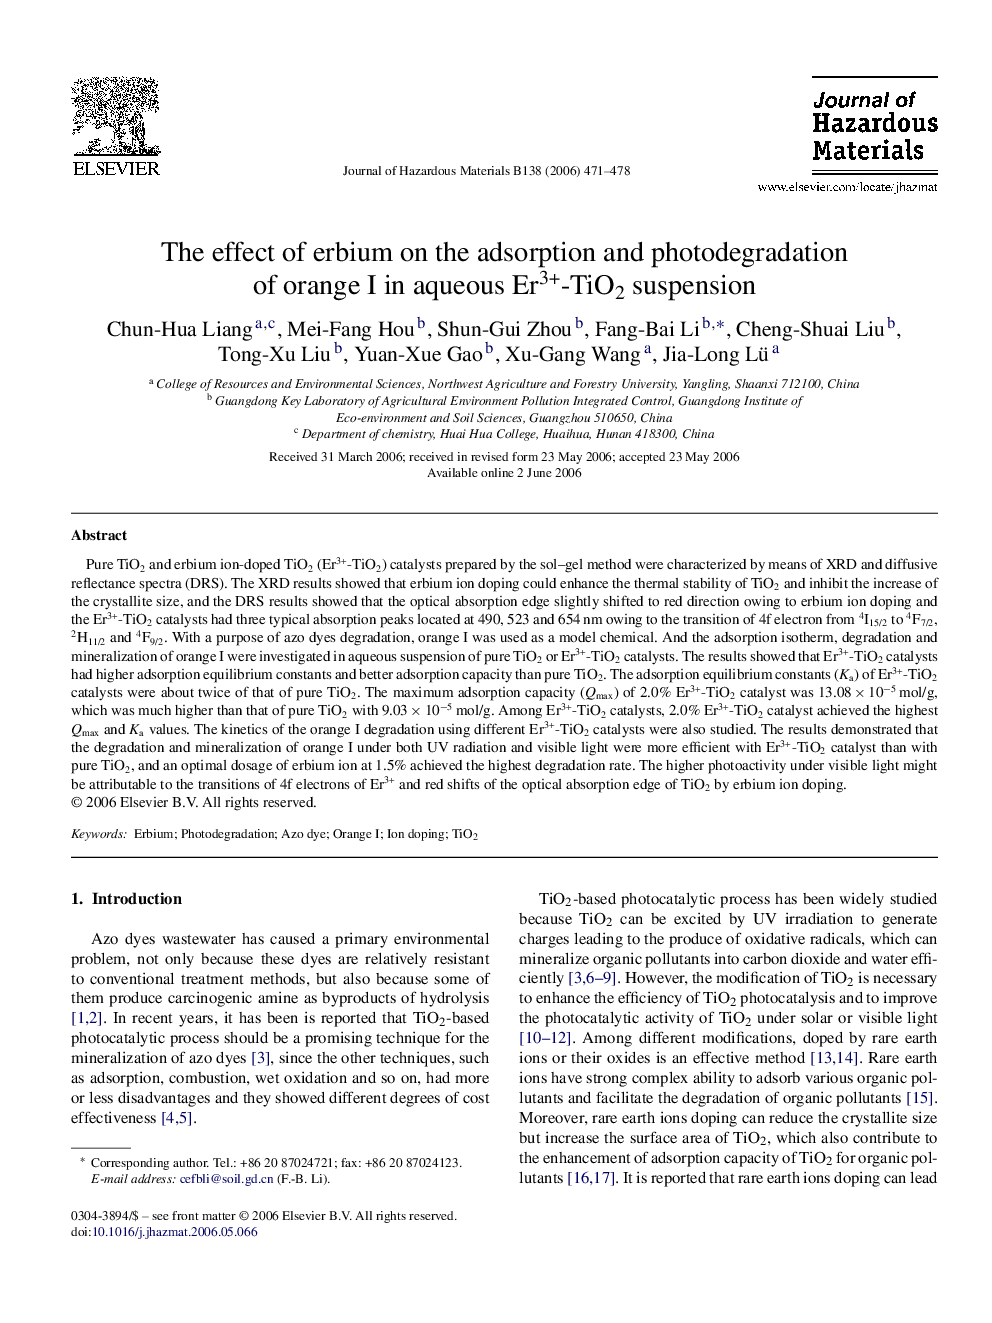 The effect of erbium on the adsorption and photodegradation of orange I in aqueous Er3+-TiO2 suspension